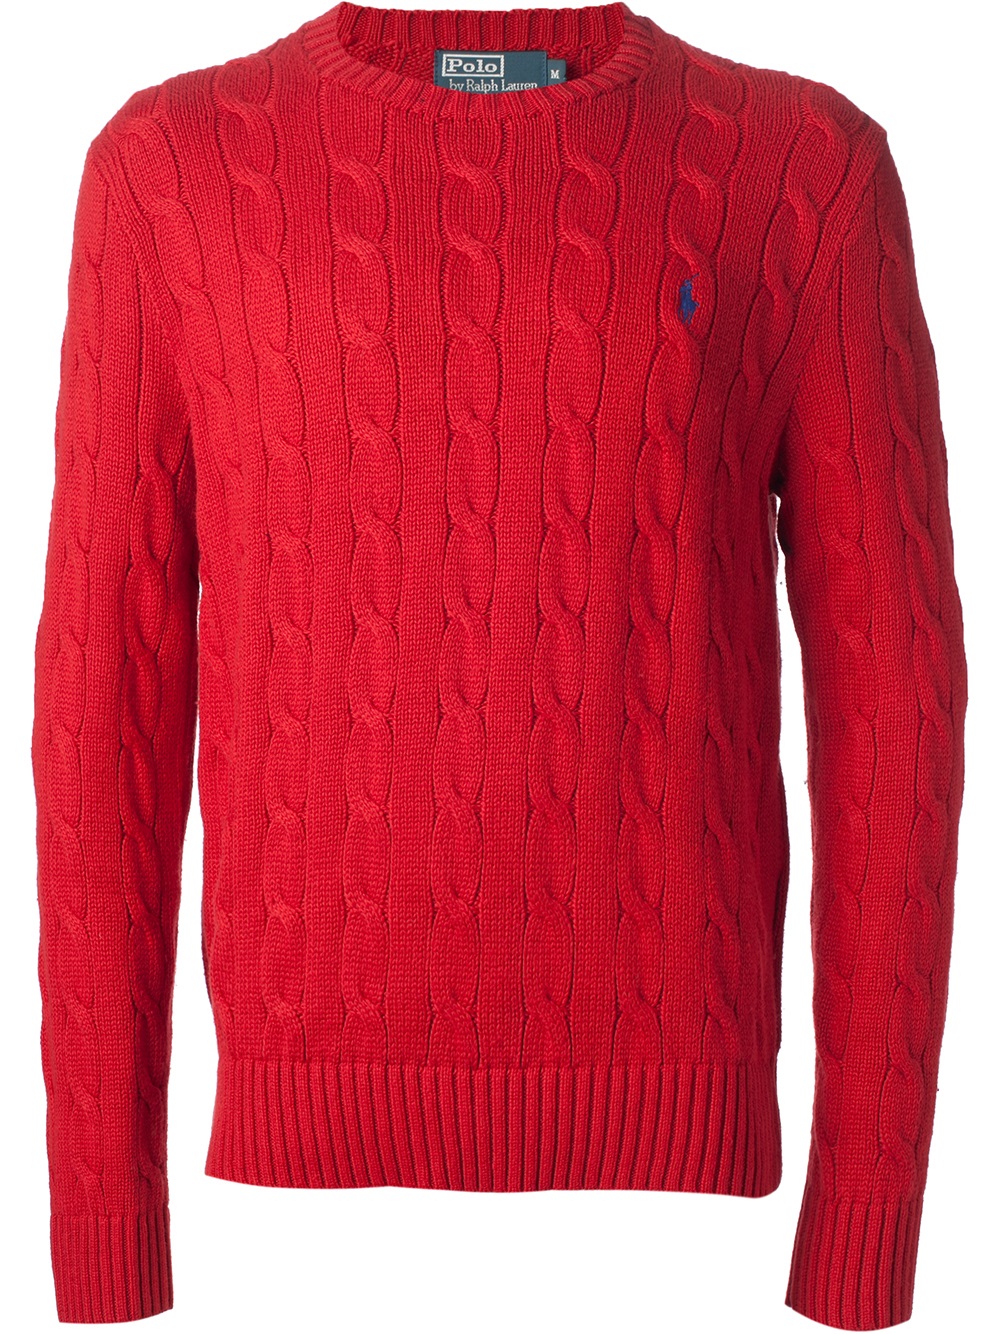 Polo Ralph Lauren Cable Knit Sweater in Red for Men | Lyst UK